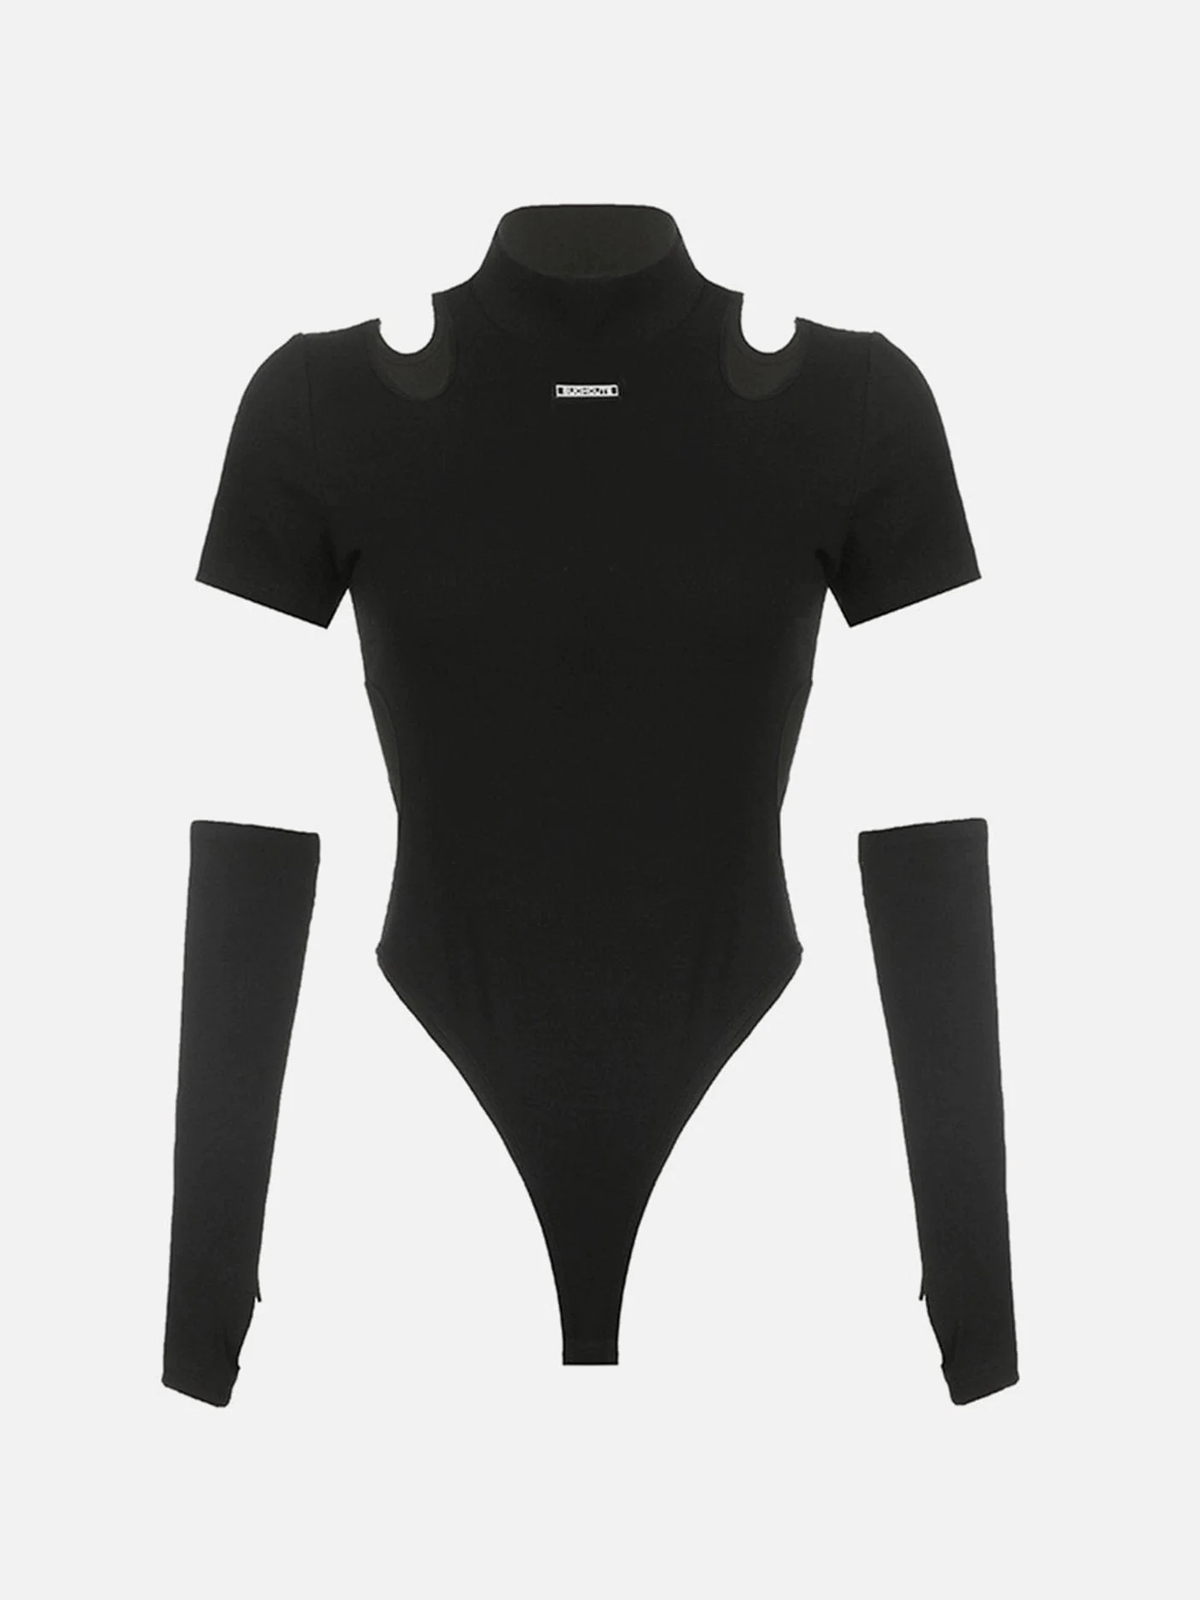 NEV Hollow Cuff Out Bodysuit